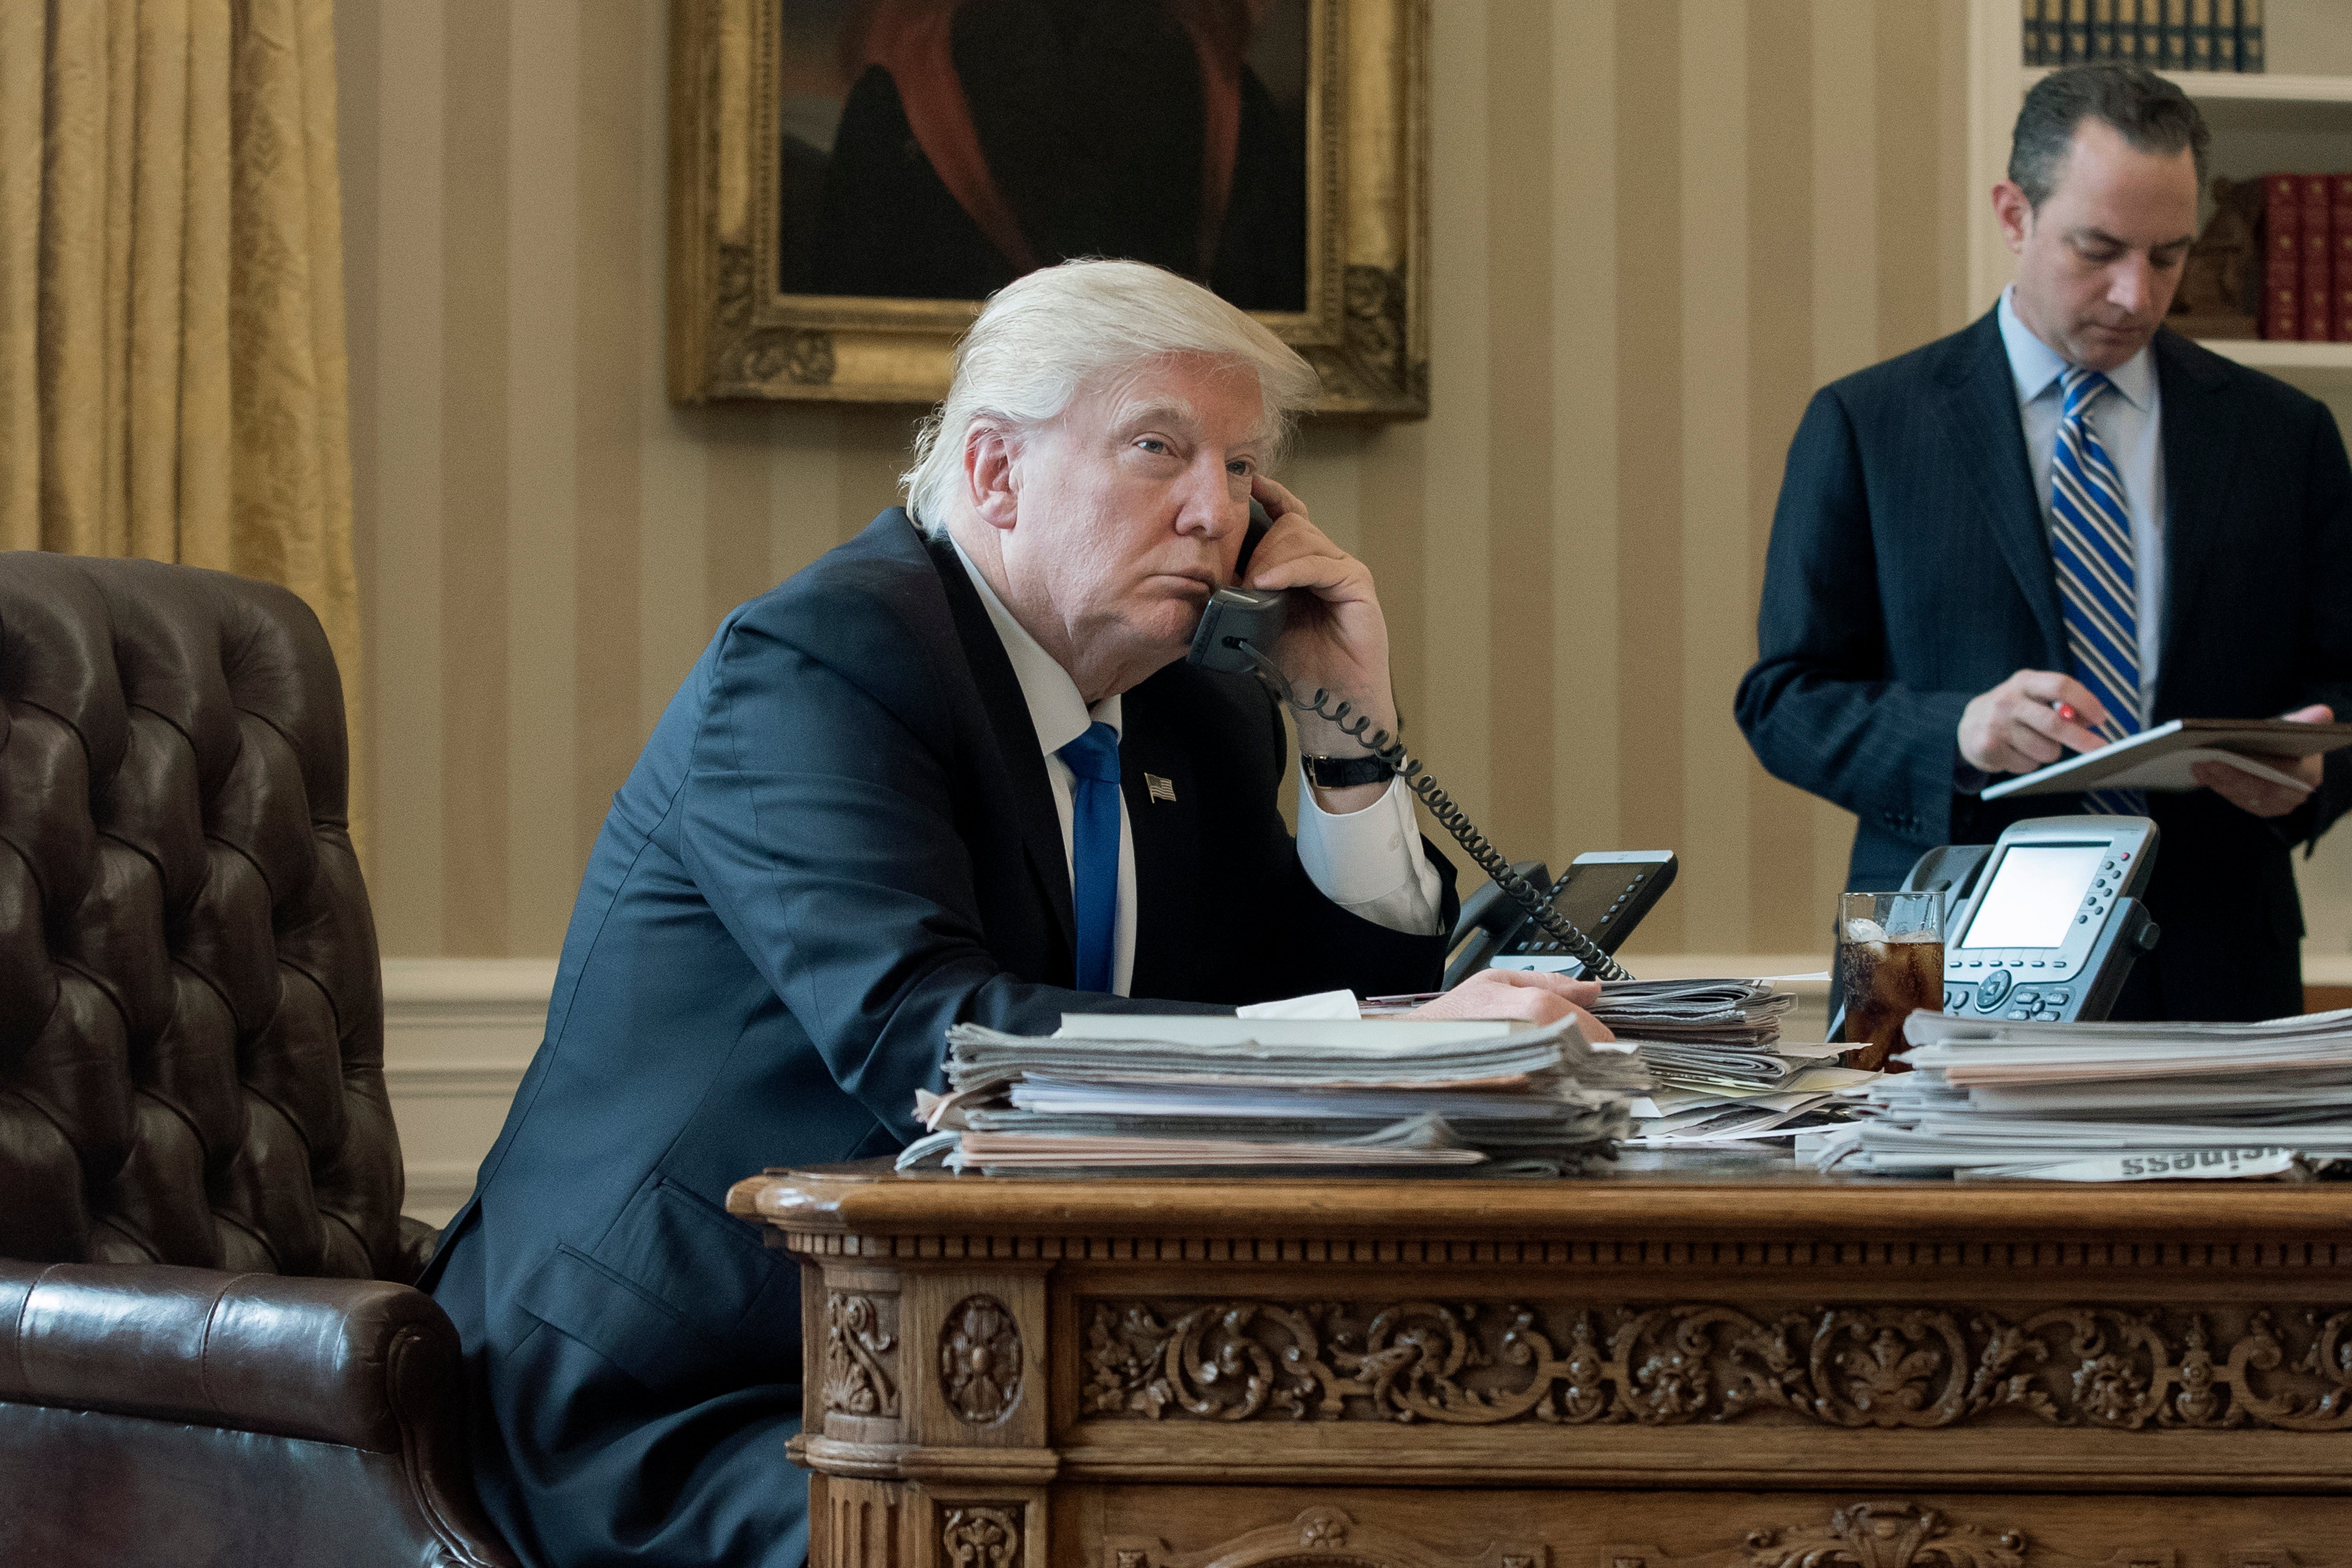 Trump uses the phrase “perfect phone call” to describe two notable events.